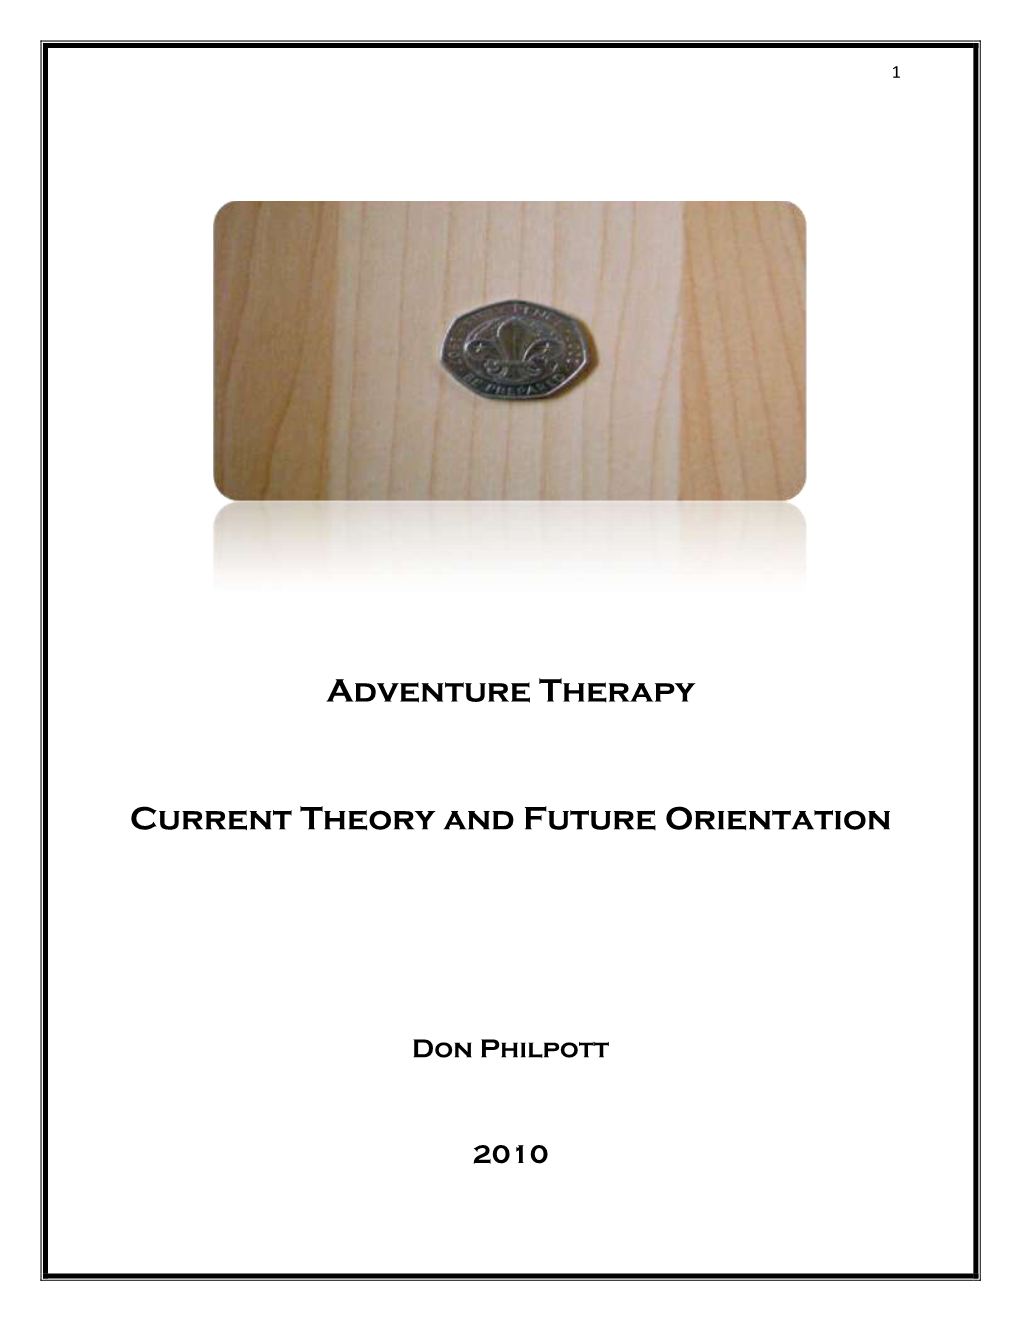 Adventure Therapy Current Theory and Future Orientation